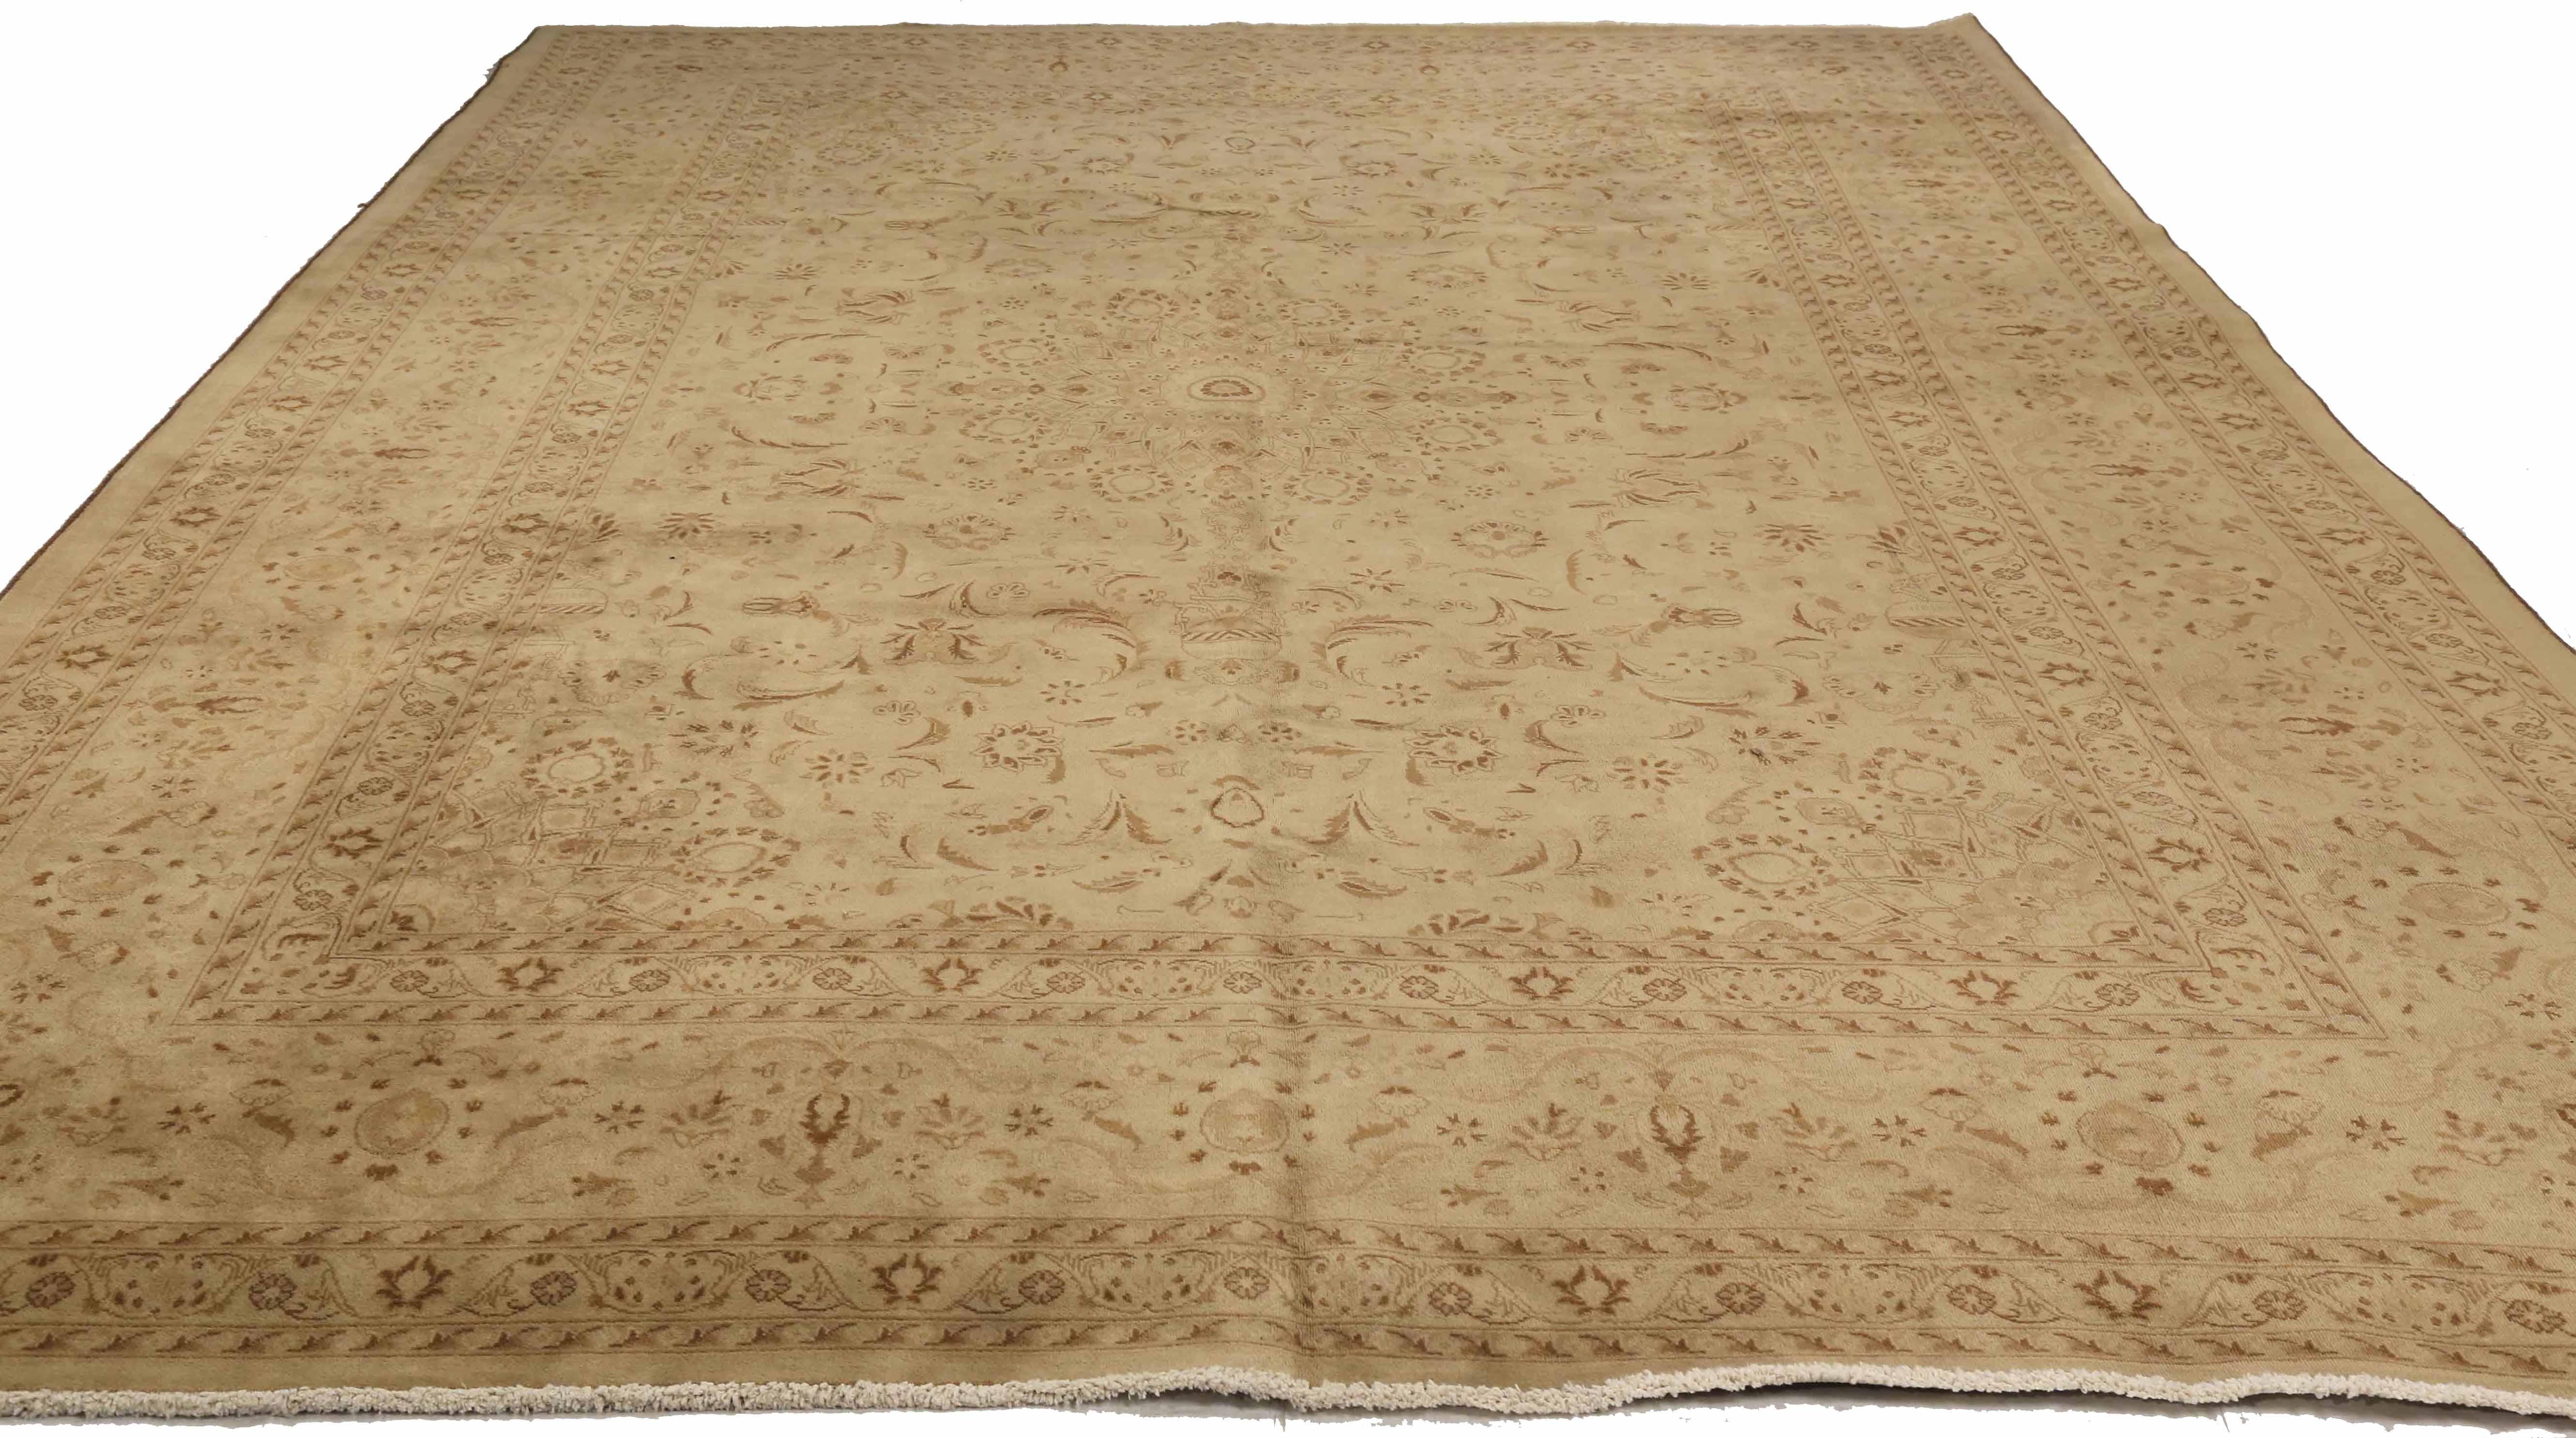 Antique persian area rug handwoven from the finest sheep’s wool. It’s colored with all-natural vegetable dyes that are safe for humans and pets. It’s a traditional Kashmir design handwoven by expert artisans. It’s a lovely area rug that can be